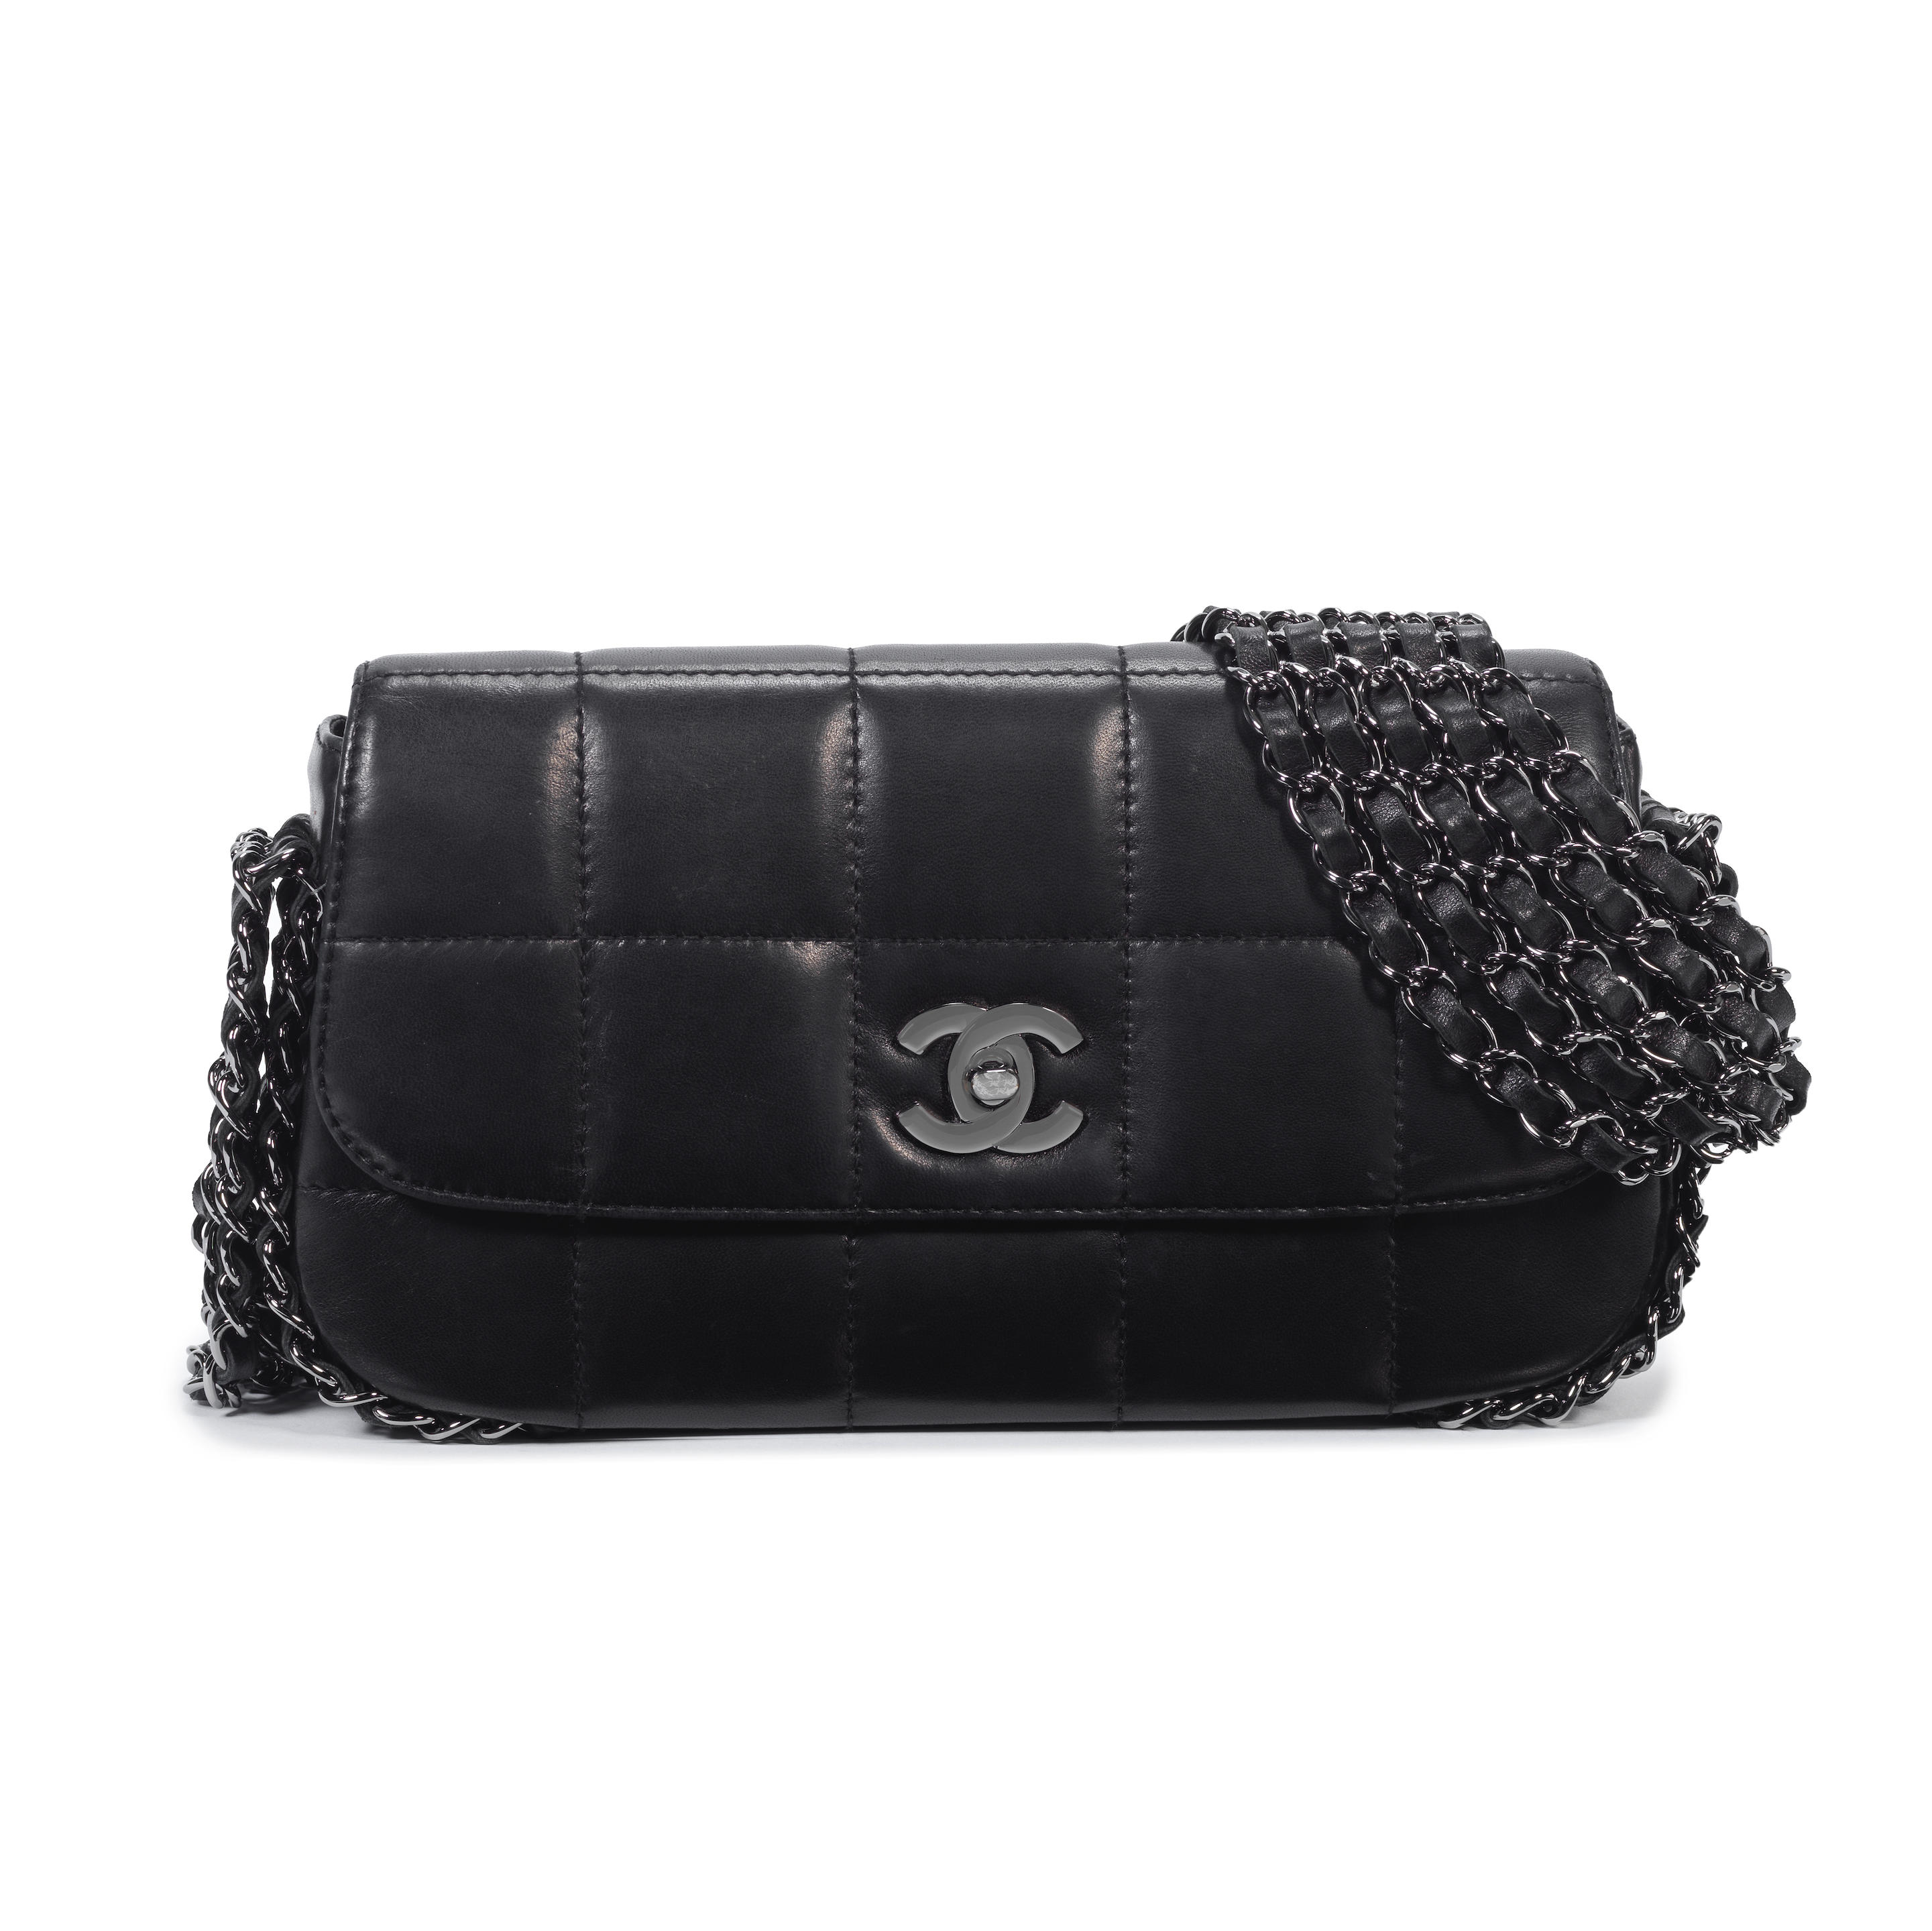 Bonhams : Chanel a Black Square Quilted Multi-Chain Flap Bag 2003-4  (includes serial sticker, authenticity card and box)